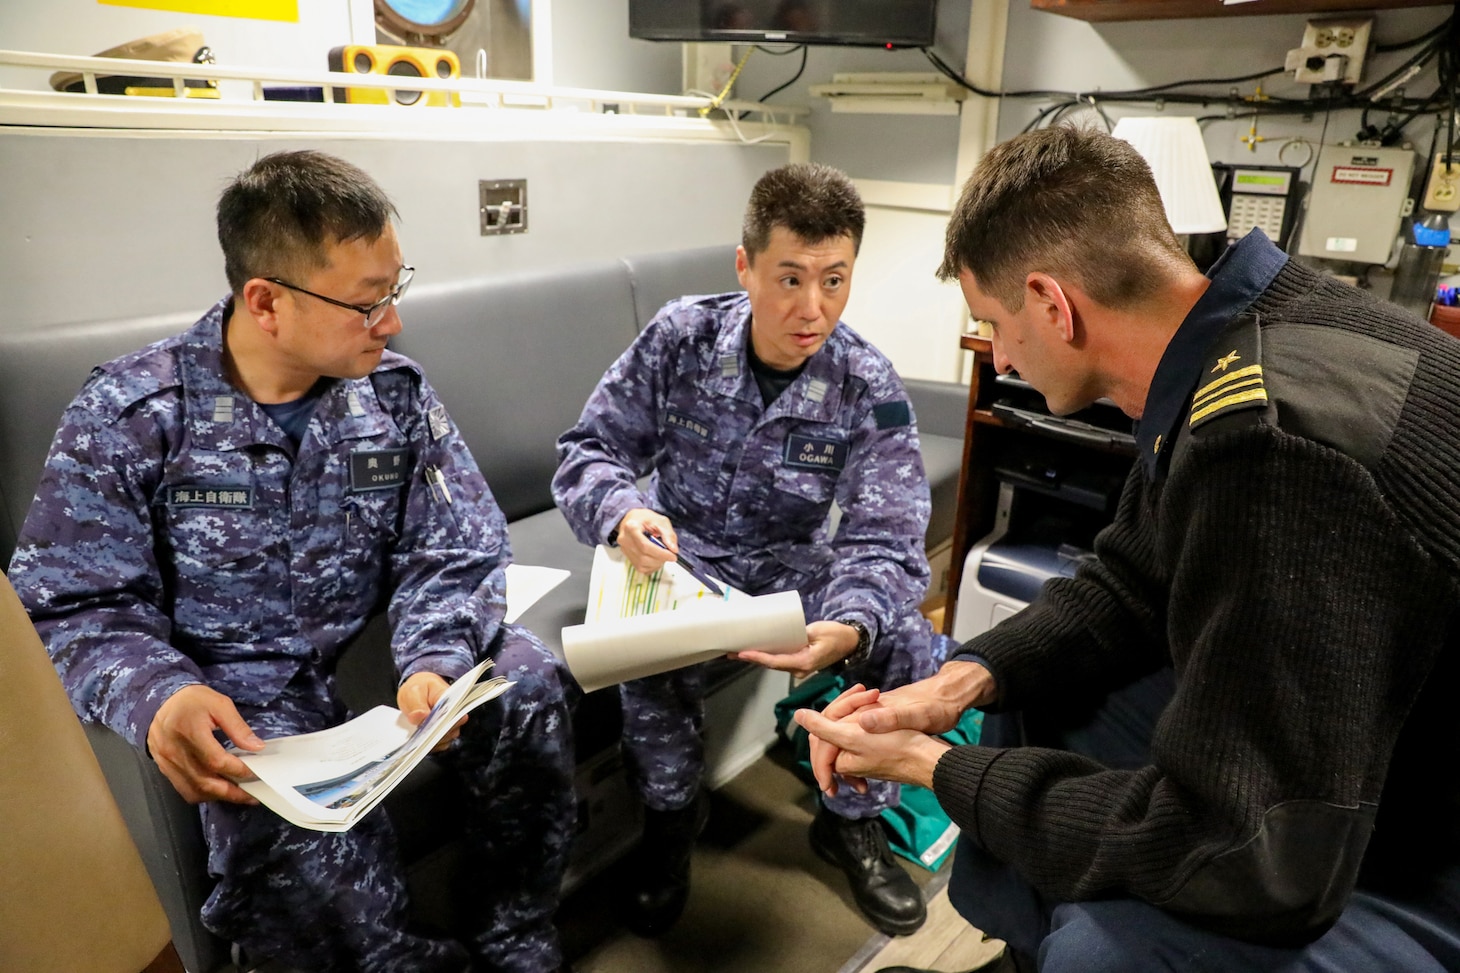 Commanding officer of Avenger-class mine countermeasures ship USS Pioneer (MCM 9)  Lt. Cmdr. Bobby Wayland, right, discusses upcoming operations for Mine Warfare Exercise 3JA 2019 with commanding officer of Japanese mine countermeasure ship JS Hirashima (MSC 601), Lt. Cmdr. Ogawa Tomoyuki, middle, and Commander of the route survey division for JMSDF Mine Warfare Support Center, Lt. Cmdr. Okuno Kazuyuki.